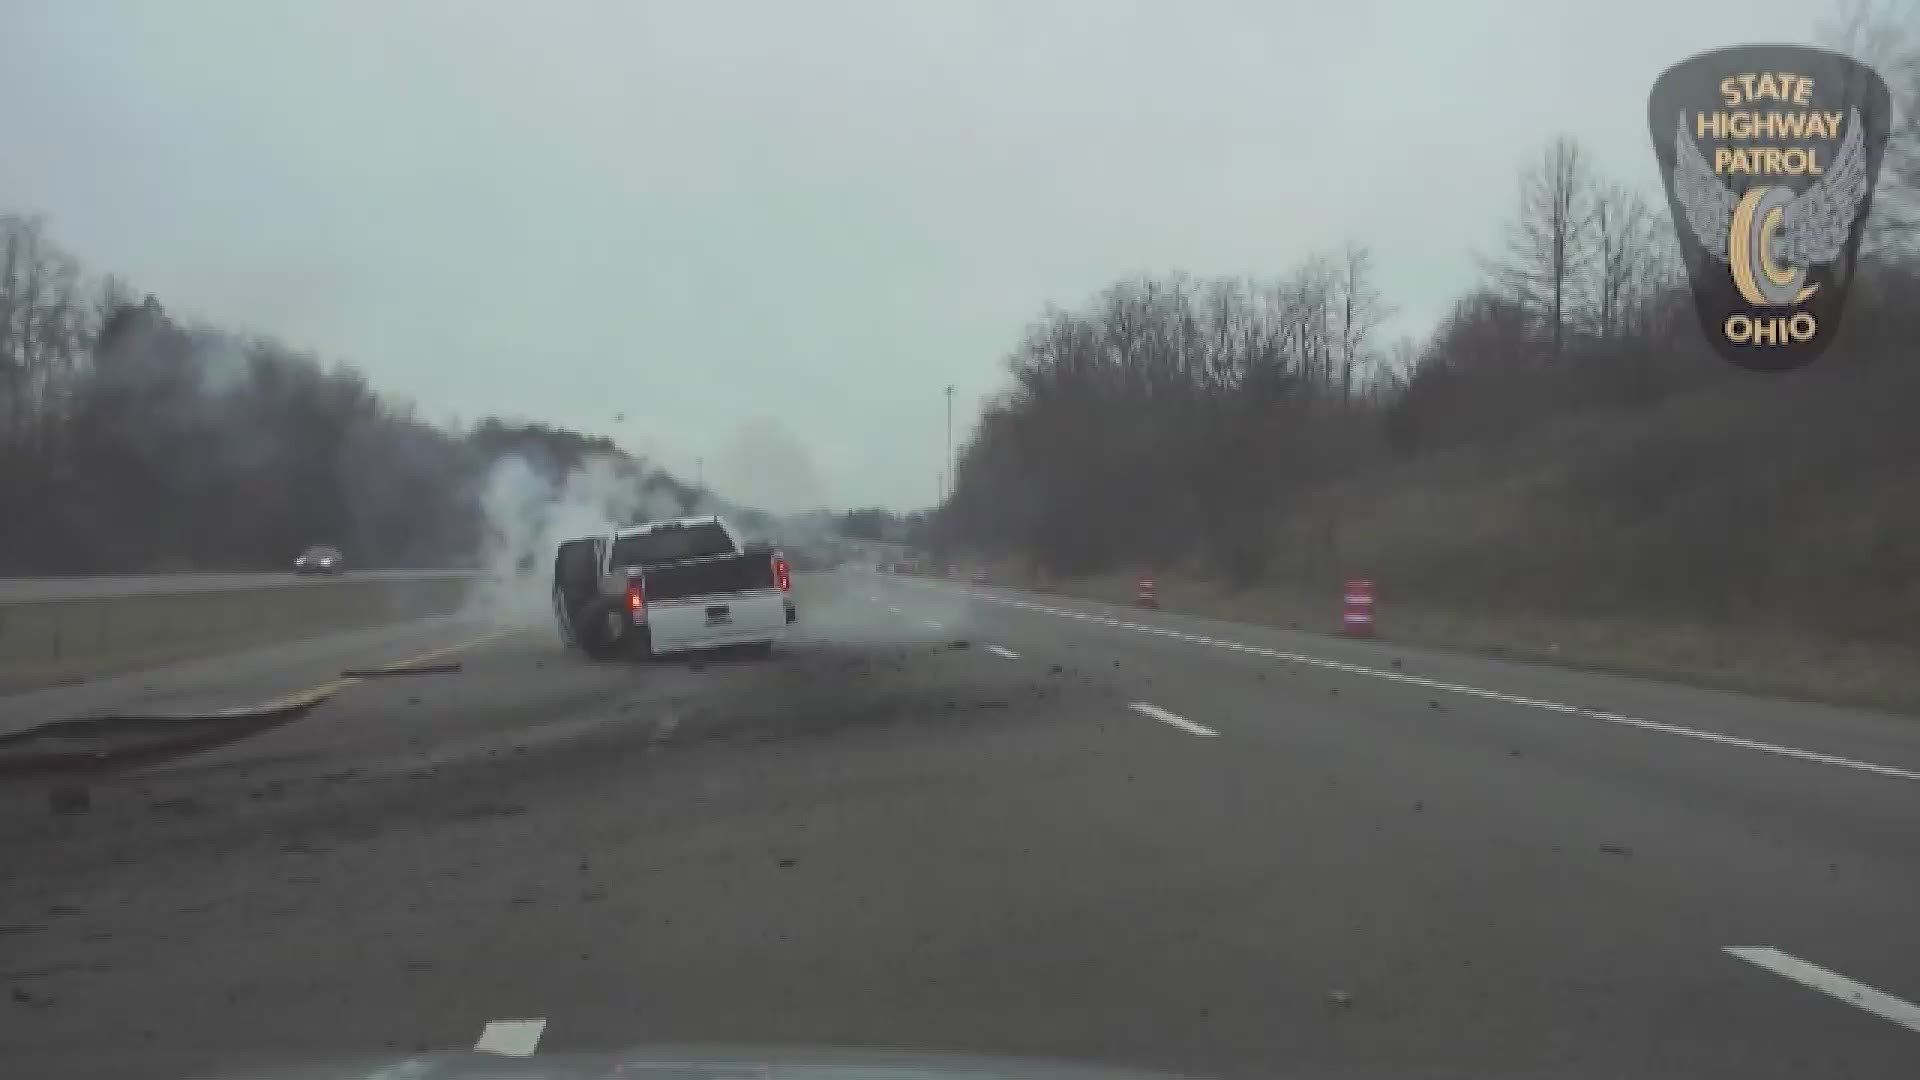 Intense dashcam video shows the moment state troopers pulled a suspect from a burning pickup truck, which crashed during a pursuit in Ashland County.